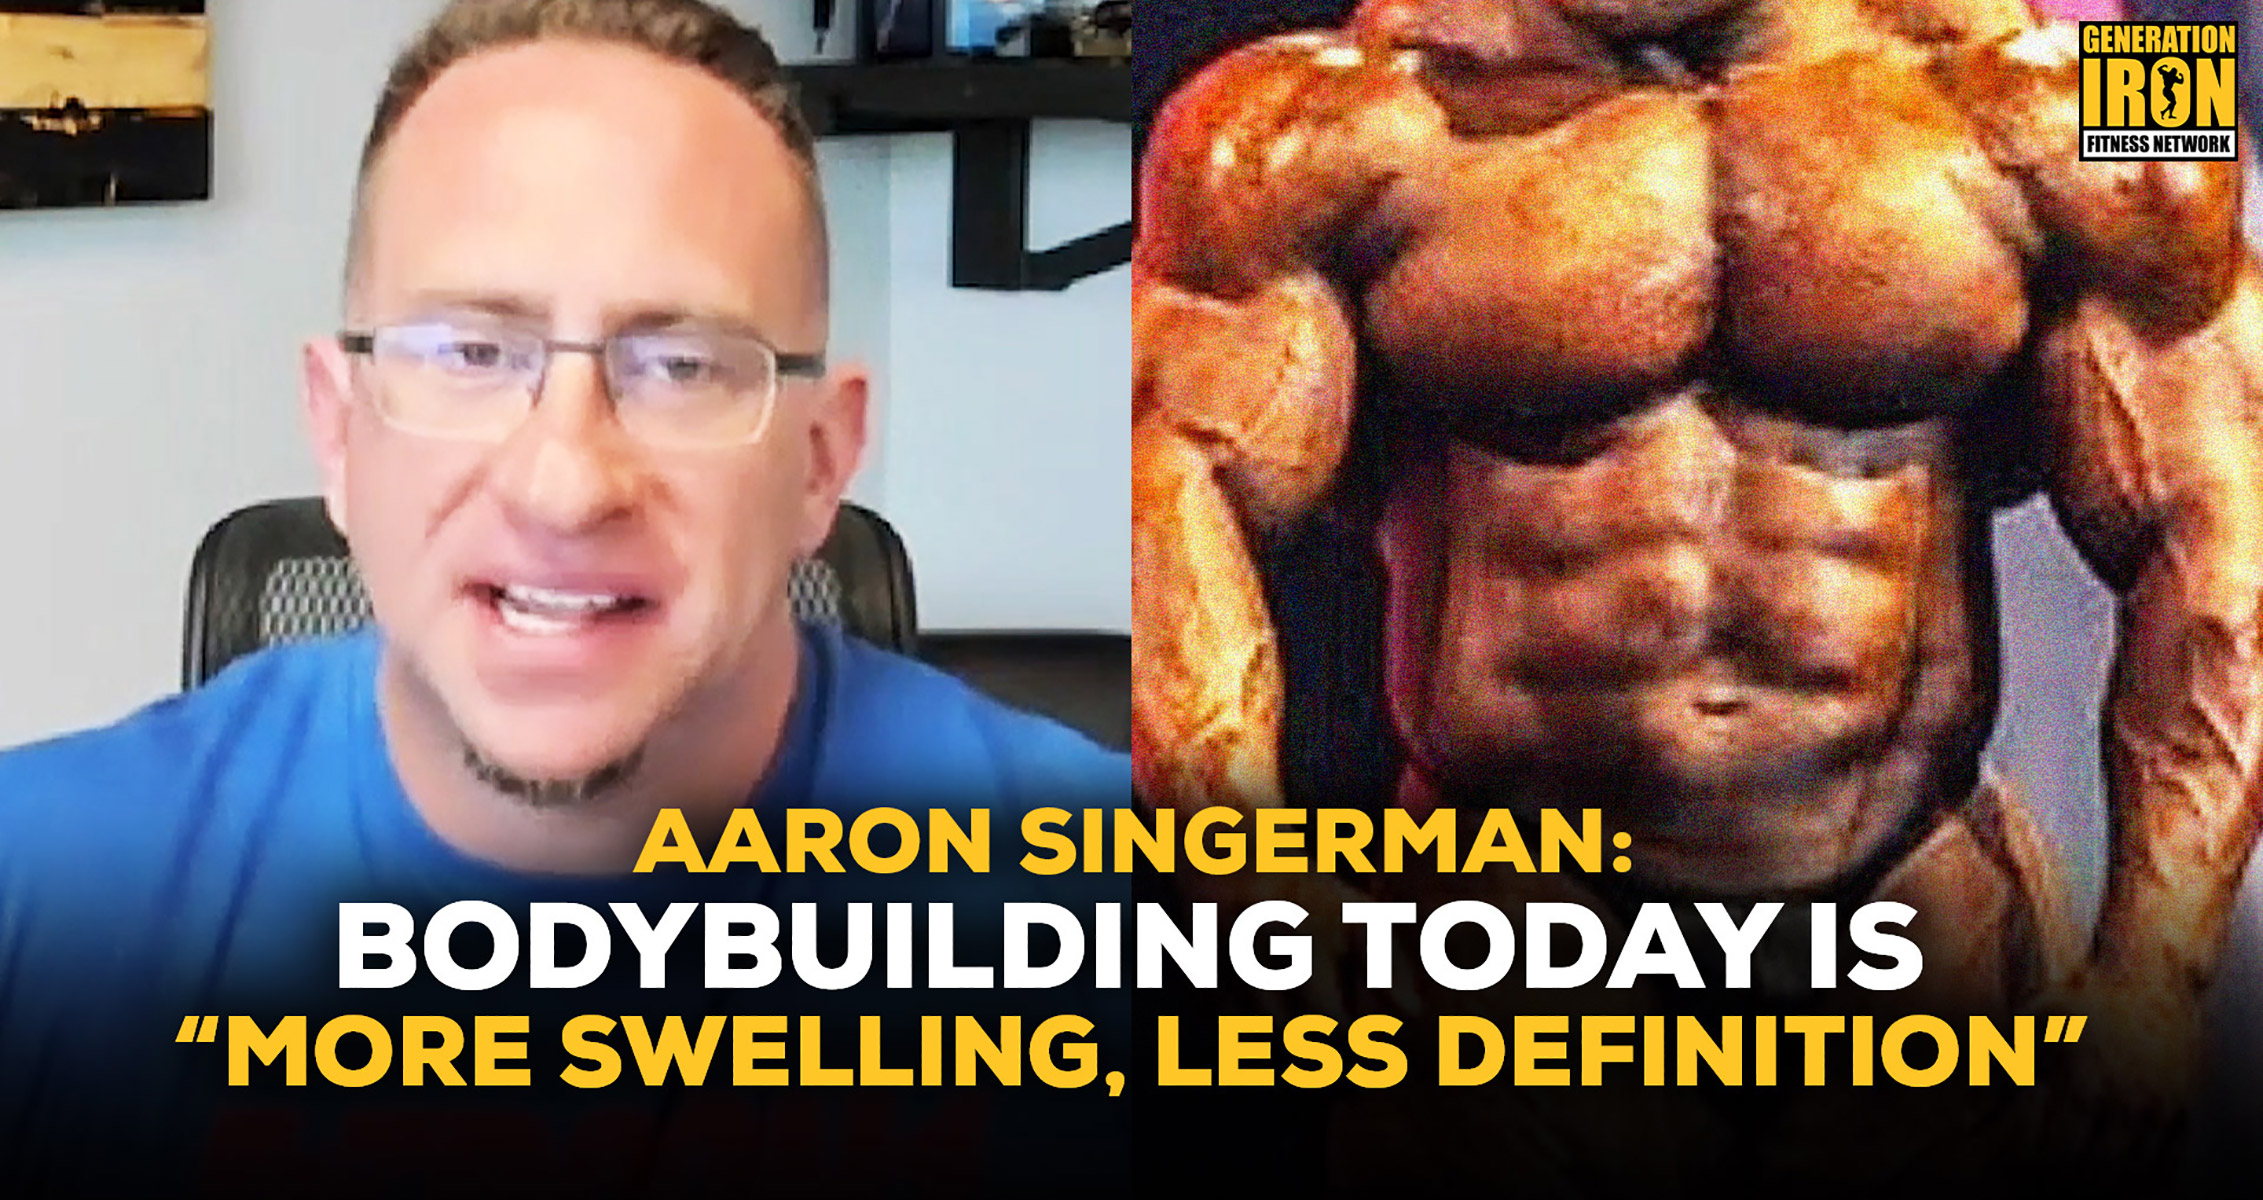 Aaron Singerman: Bodybuilding Today Is “More Swelling, Less Definition”